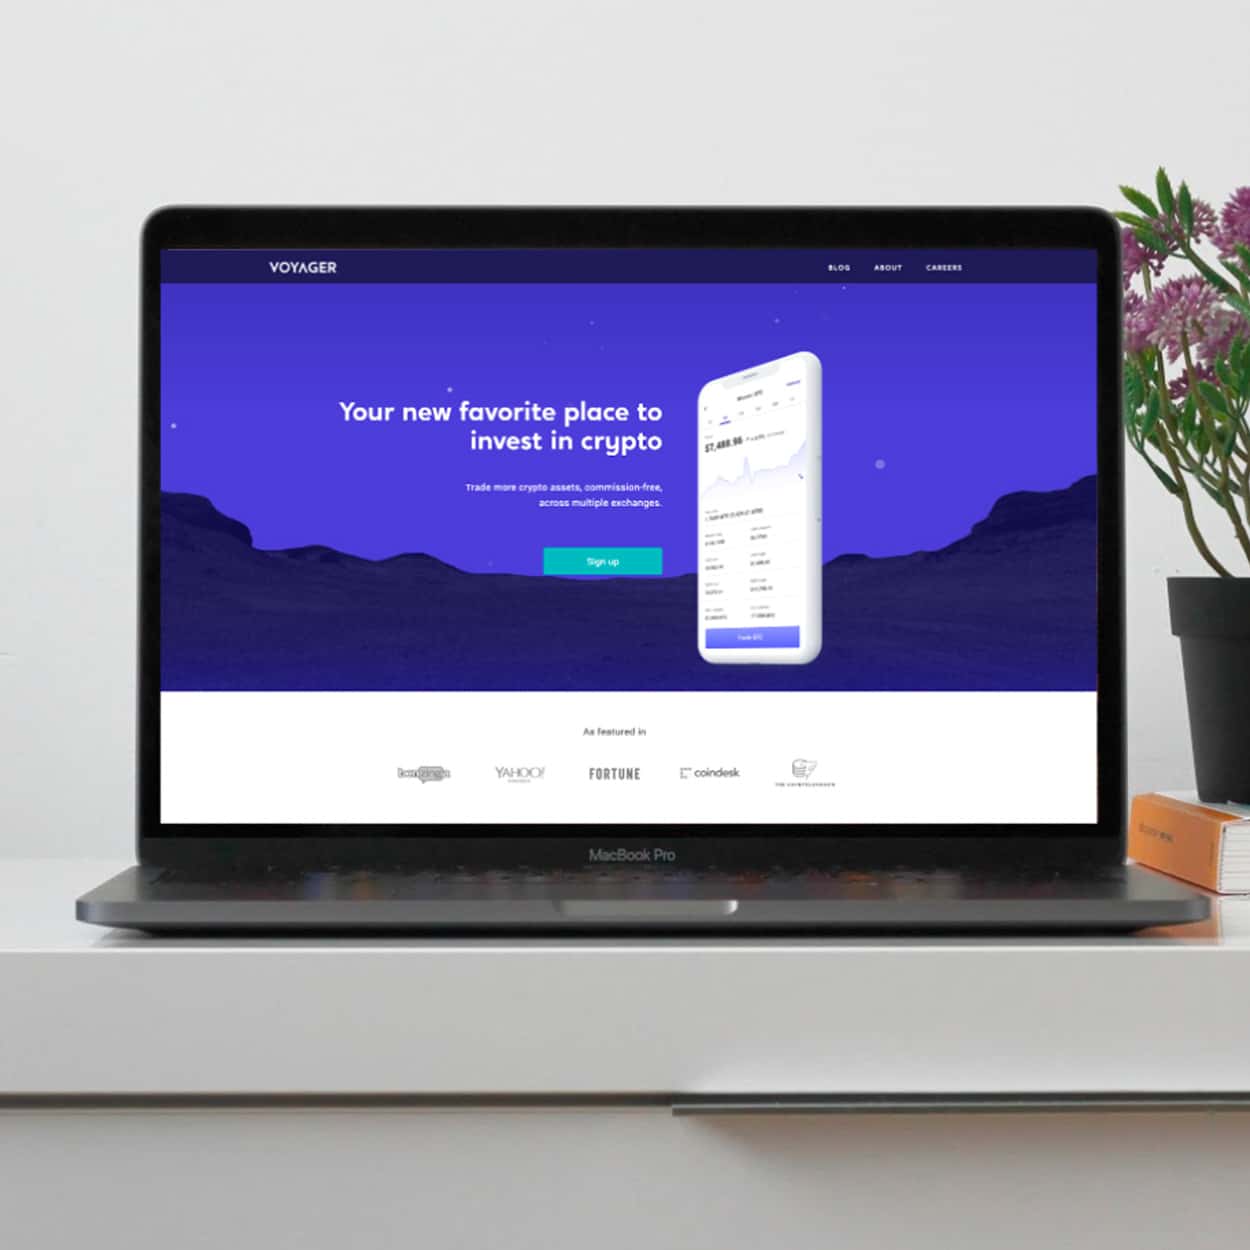 A laptop displaying Voyager's cryptocurrency investment platform with a blue and white interface. The screen shows the text, "Your new favorite place to invest in crypto," above an image of their mobile app. The laptop is on a white desk beside a potted plant, ensuring an optimal CX.